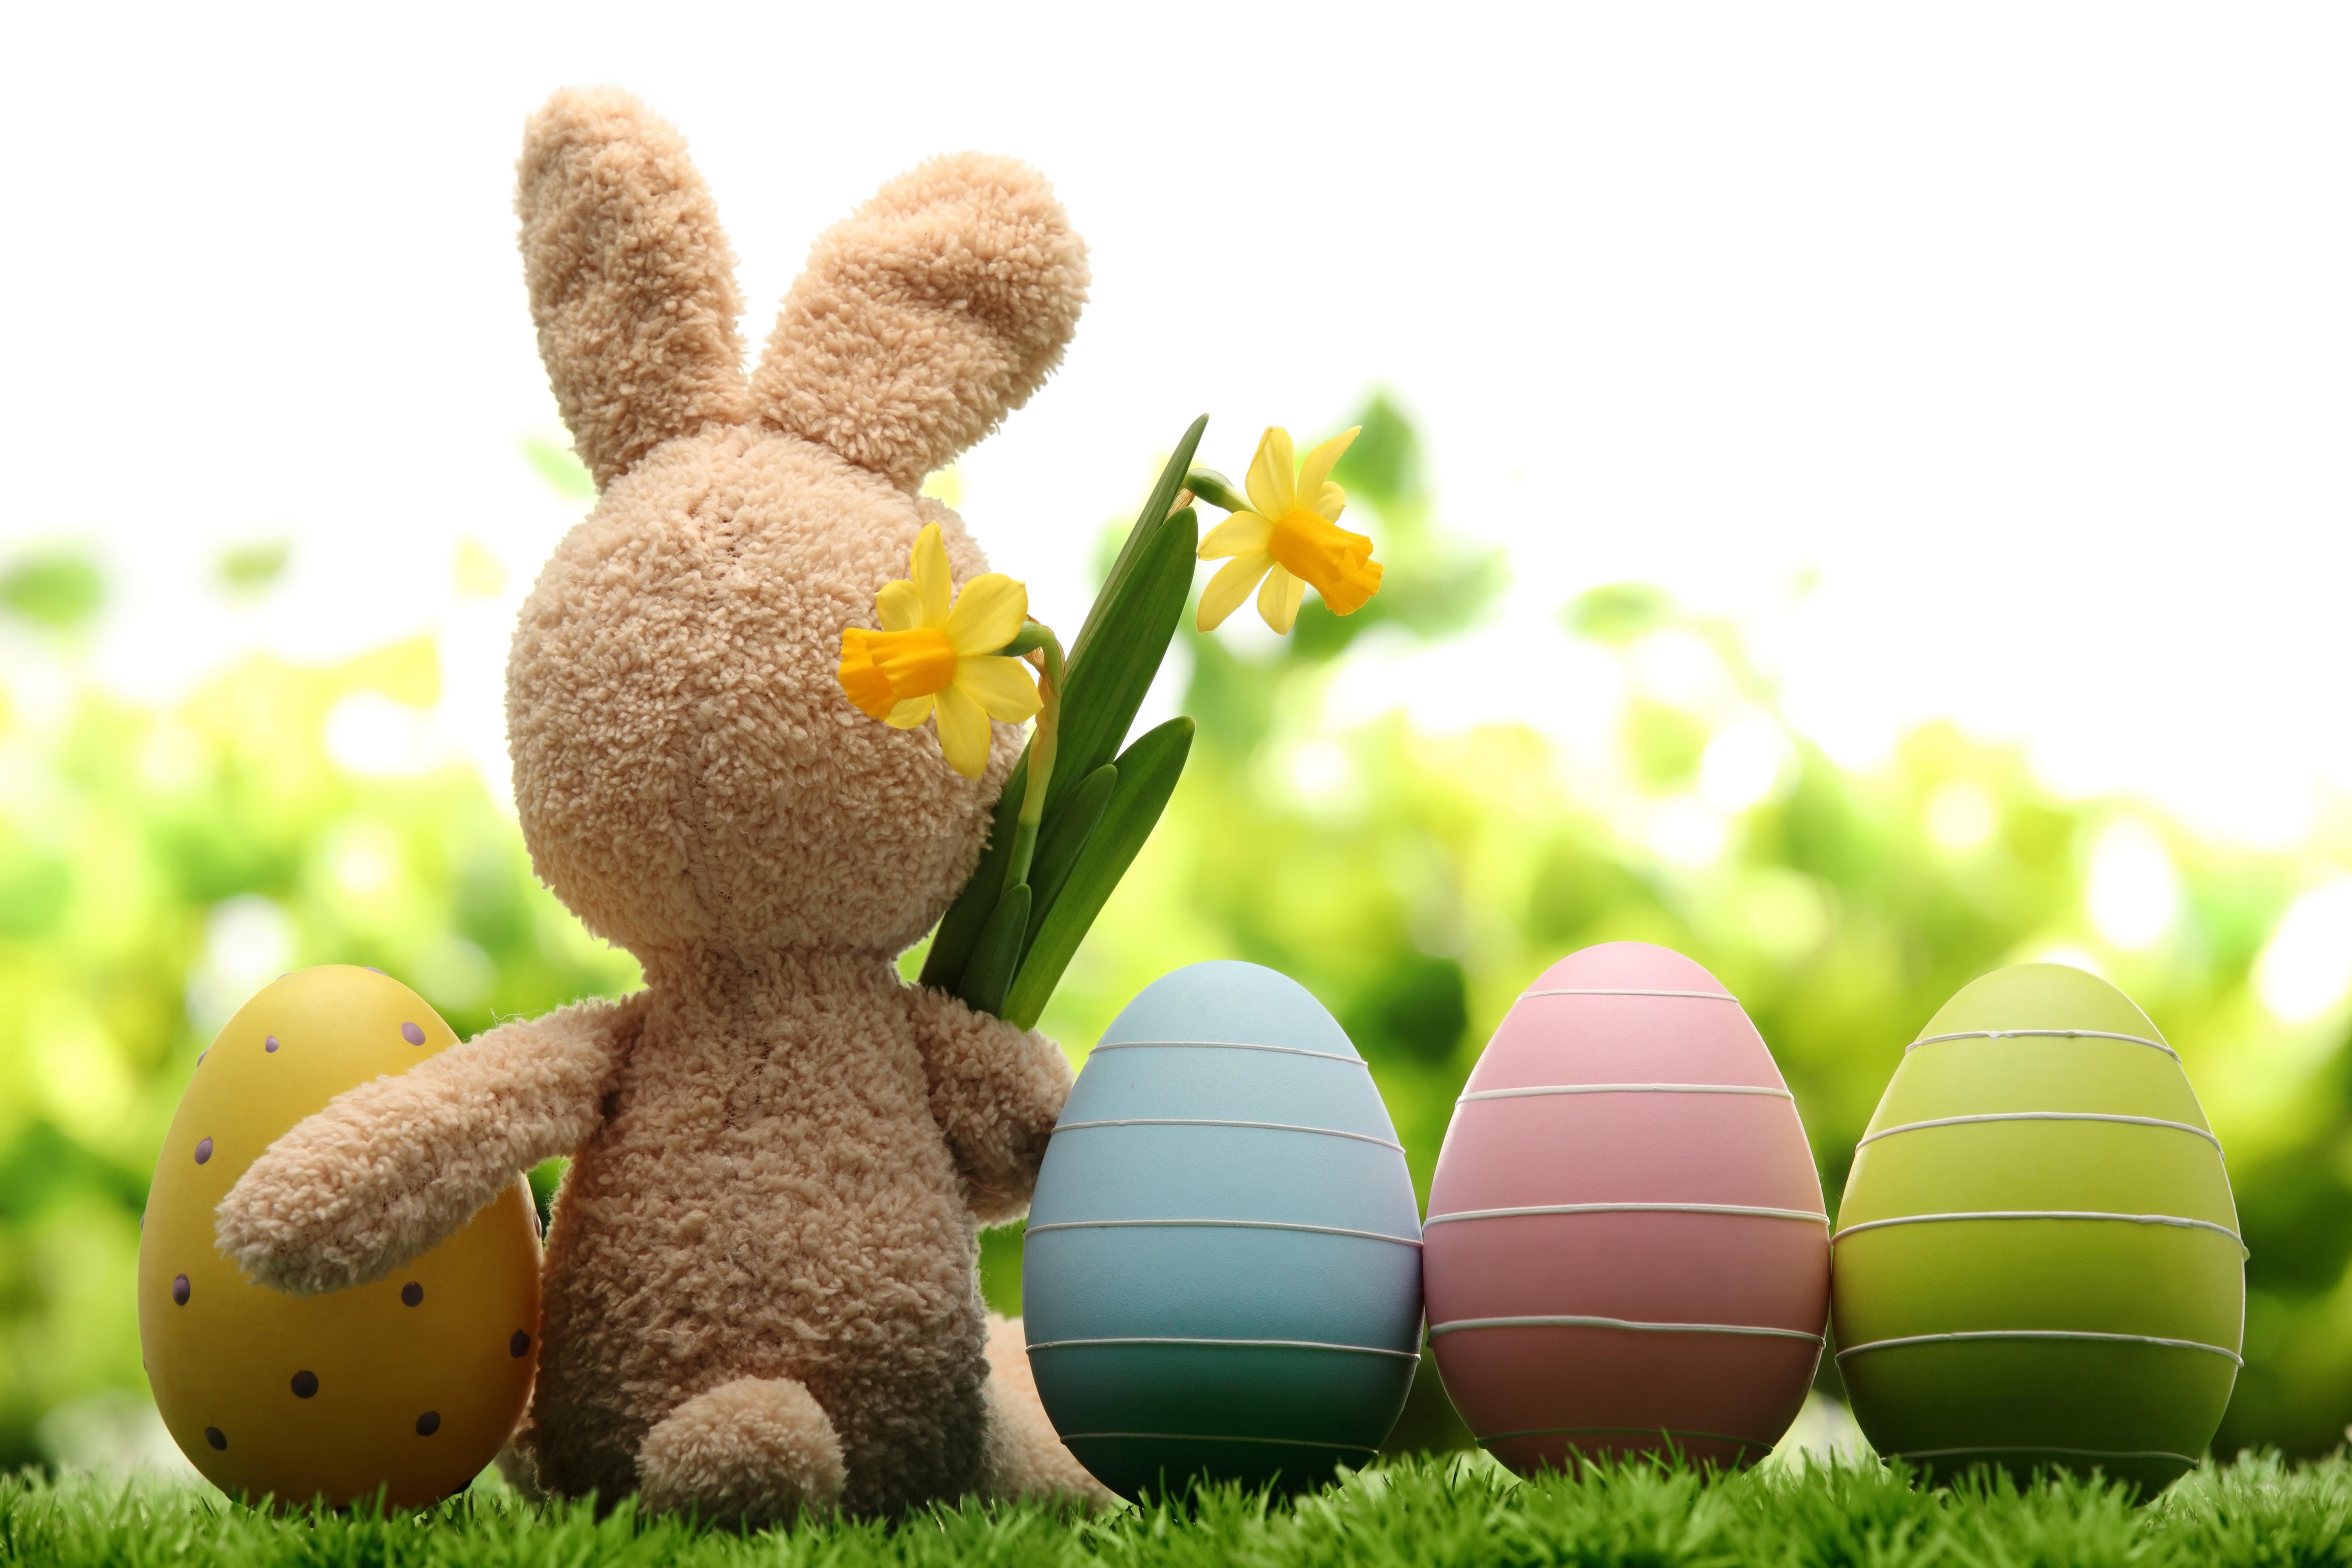 happy easter wallpaper,easter egg,grass,easter,stuffed toy,easter bunny